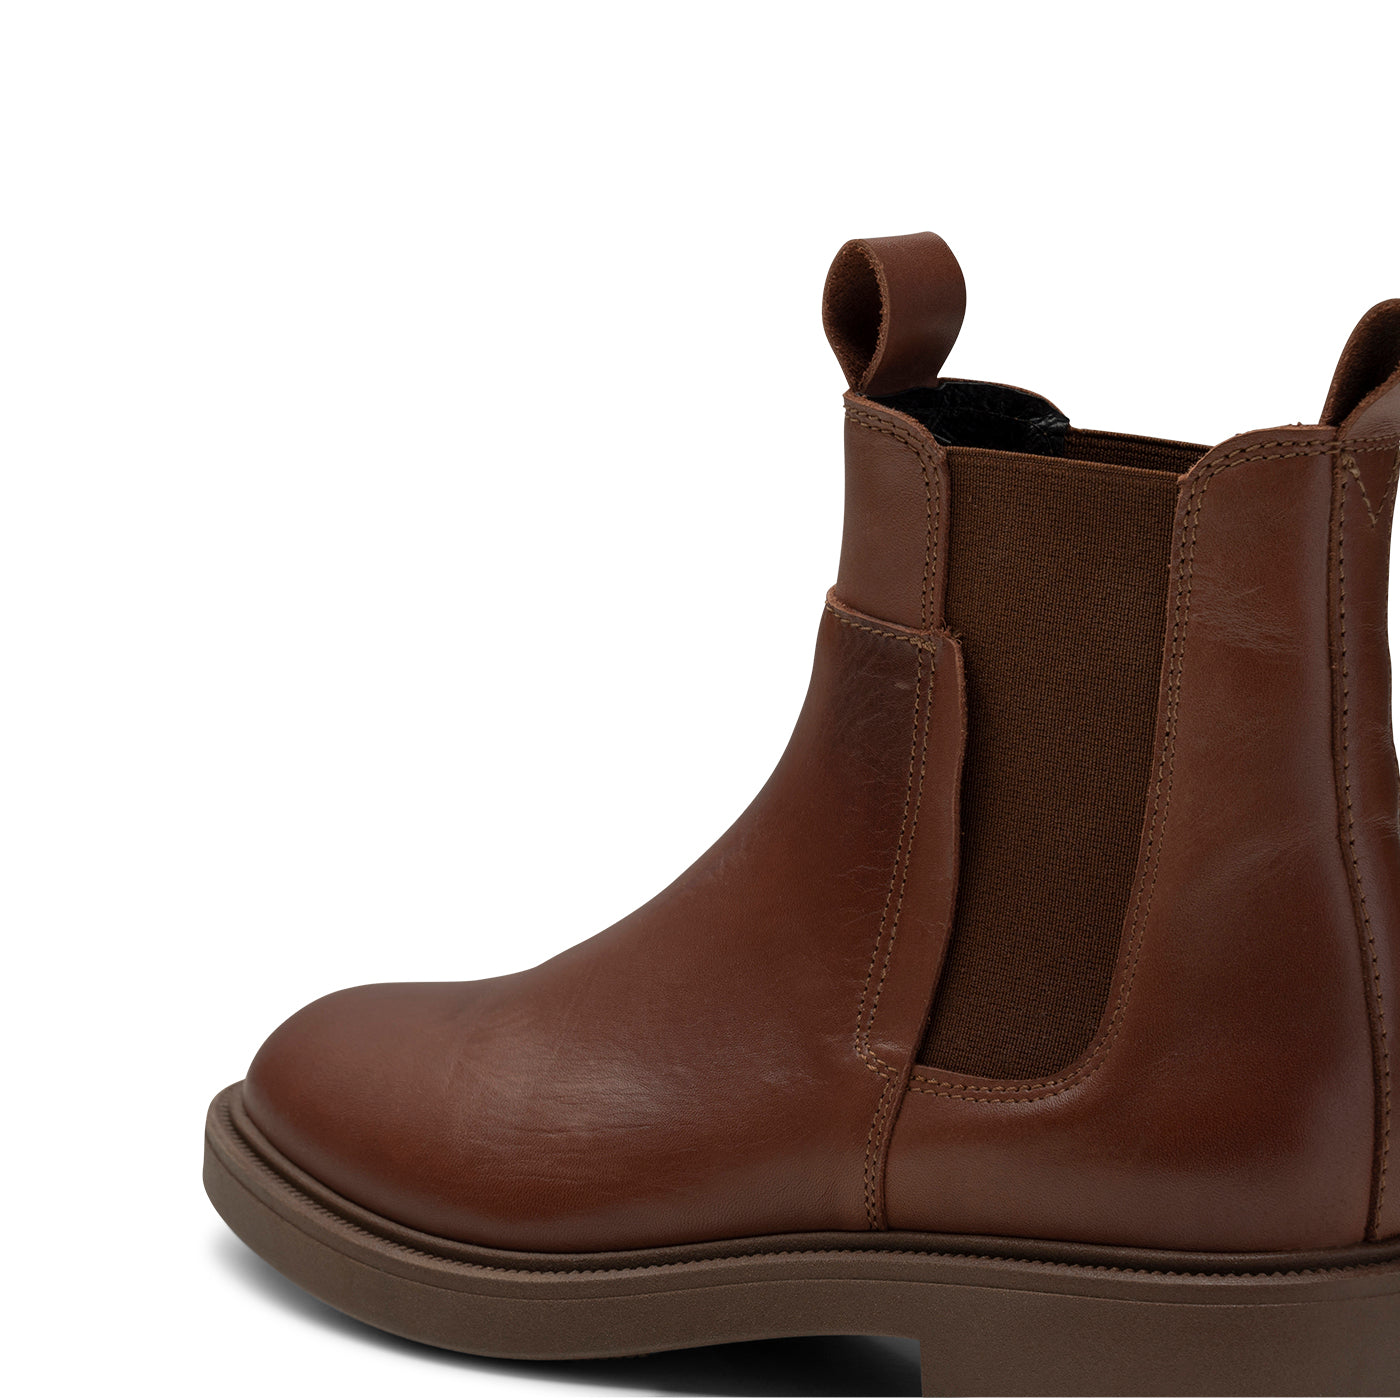 SHOE THE BEAR WOMENS Thyra chelsea boot leather Chelsea Boots 136 CHESTNUT BROWN